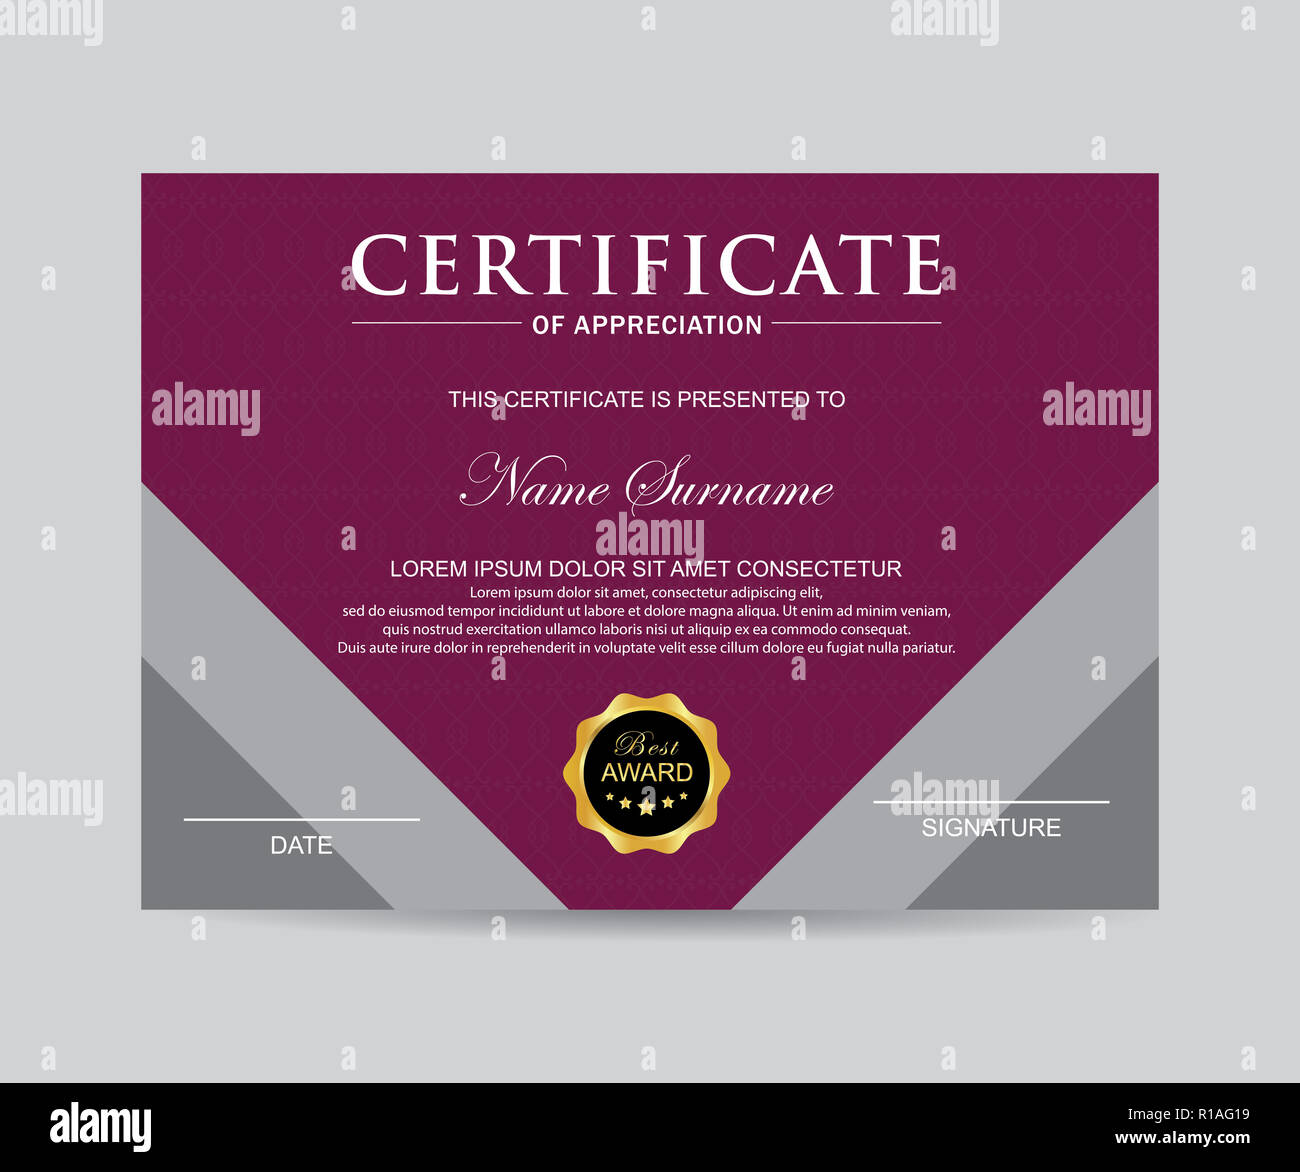 Certificate Template High Resolution Stock Photography and Images With Regard To Borderless Certificate Templates